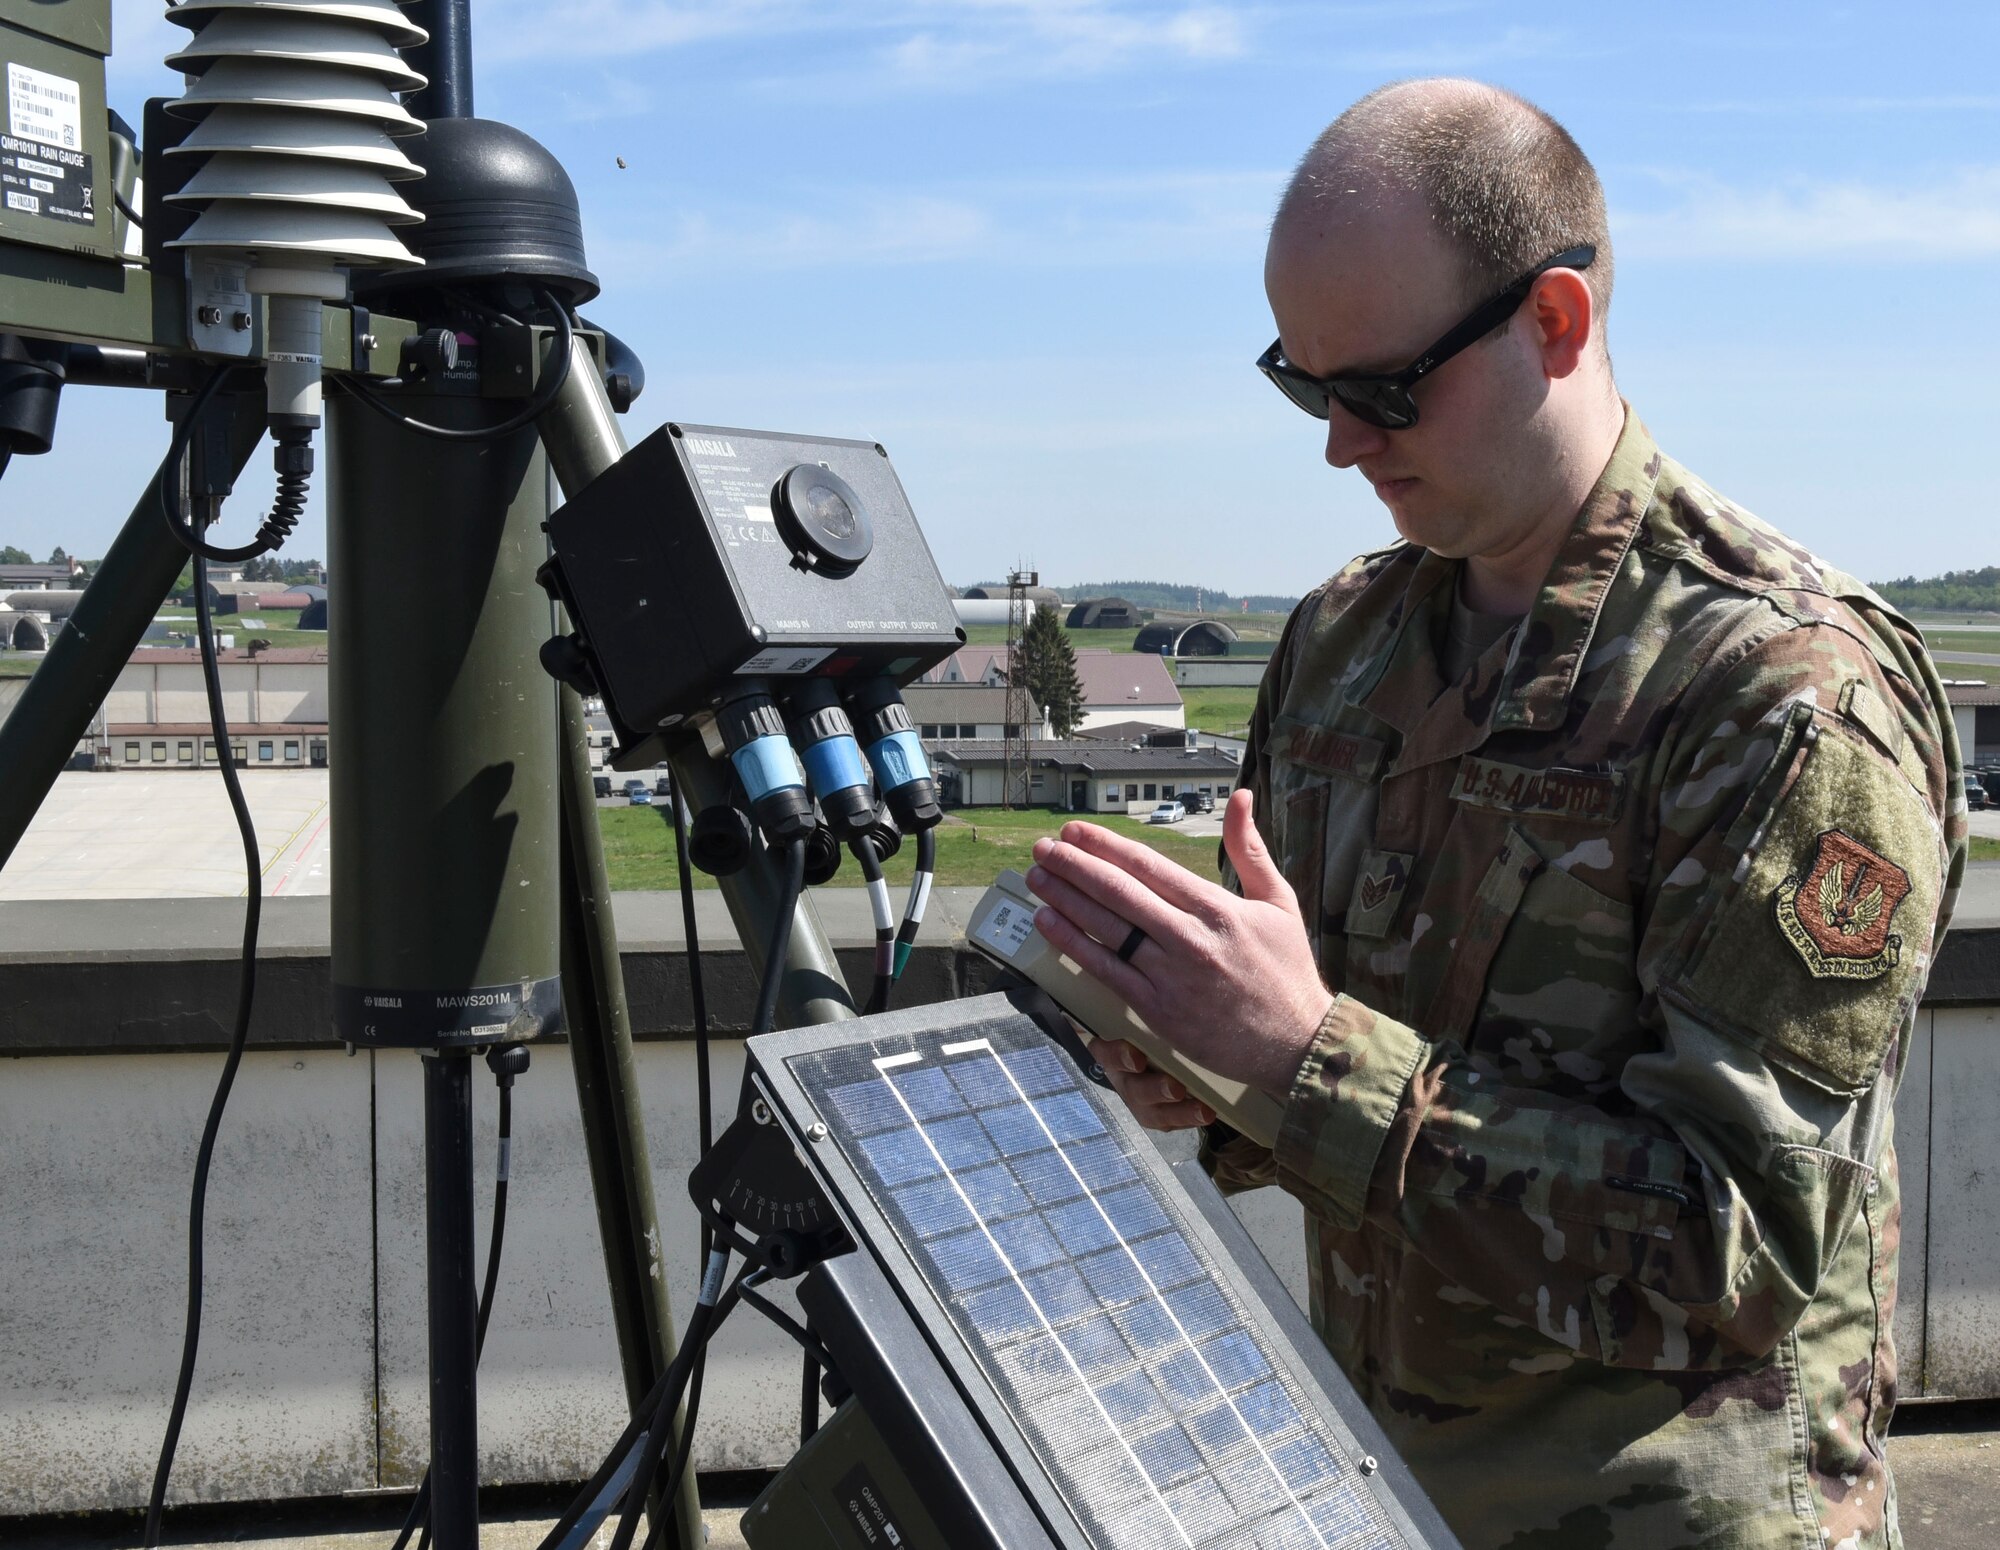 U.S. Air Force Staff Sgt. Bradley Gallaher, 52nd OSS Weather Flight training manager, uses a Tactical Meteorological Observation System (TMQ-53), at Spangdahlem Air Base, Germany, April 28, 2020. Gallaher has been maintaining mission readiness during the COVID-19 pandemic by ensuring records and training are up to date. (U.S. Air Force photo by Senior Airman Melody W. Howley)